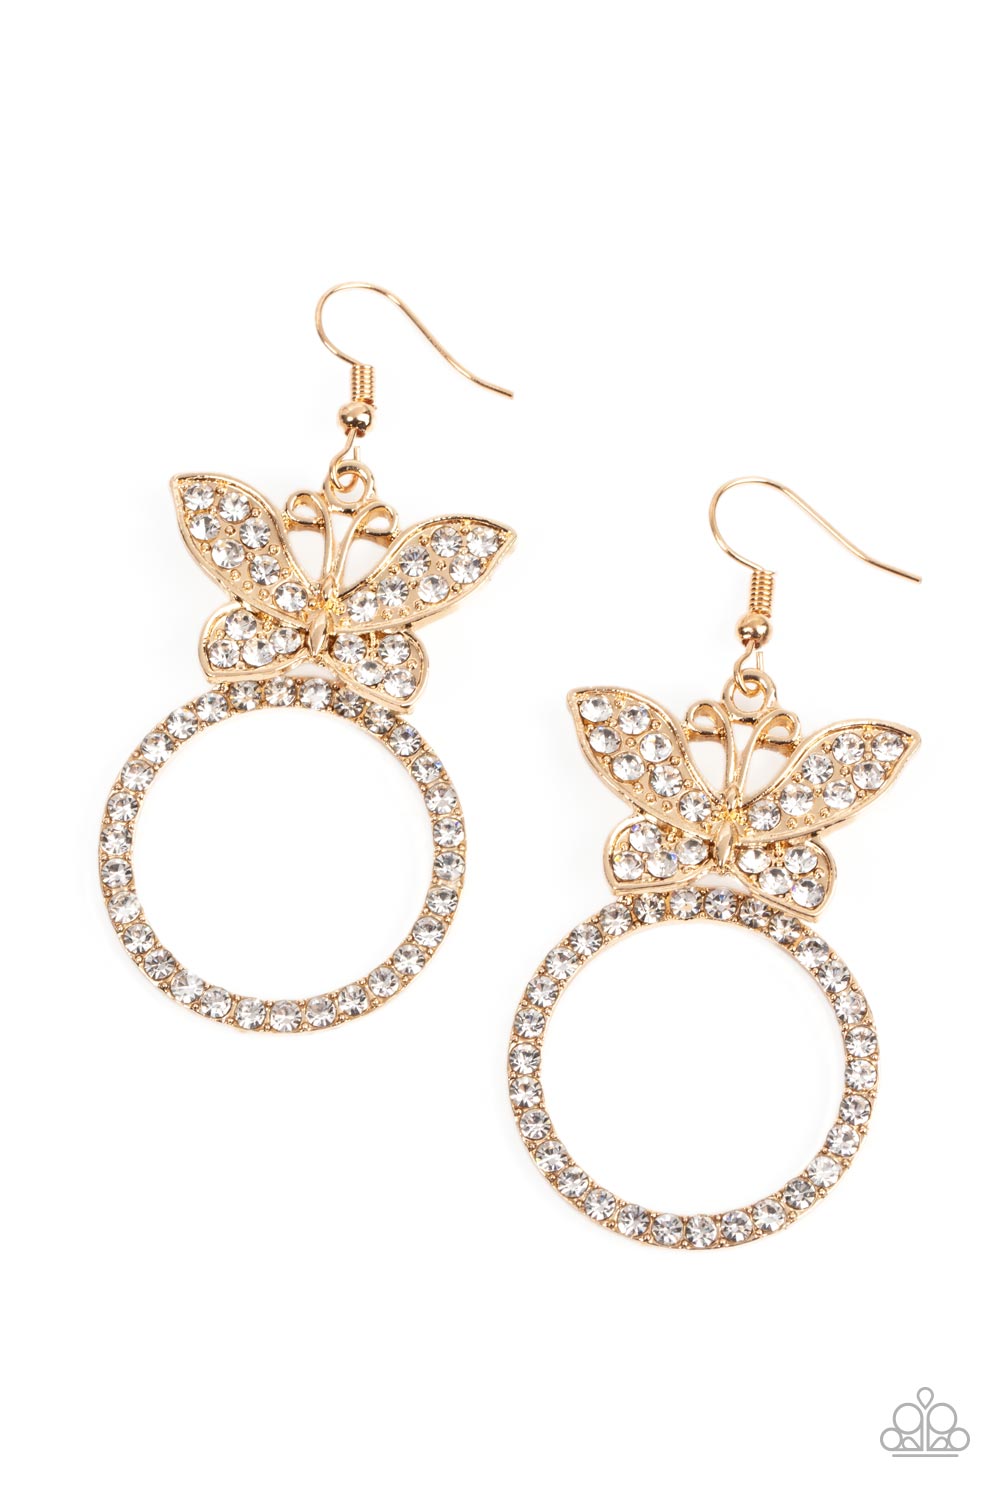 Paradise Found Gold Paparazzi Earrings Cashmere Pink Jewels